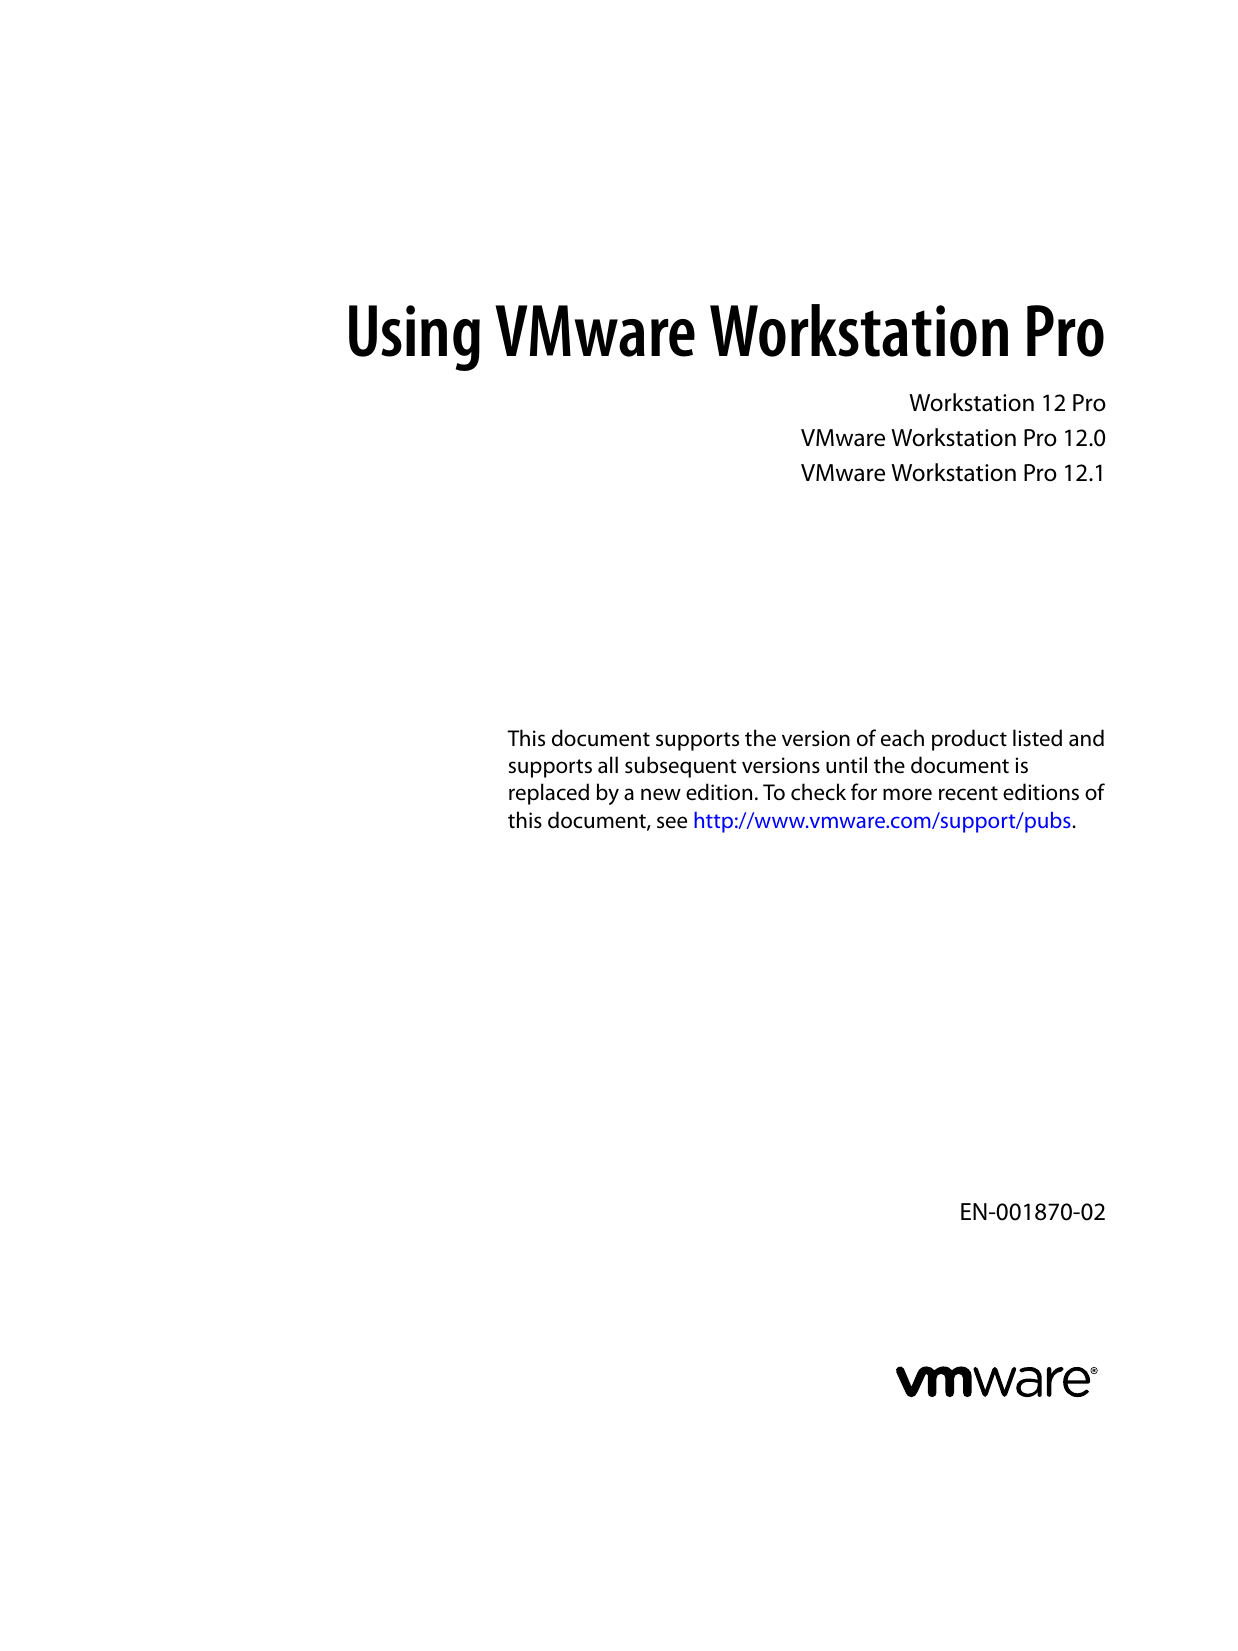 how to import ova into vmware workstation 12 pro